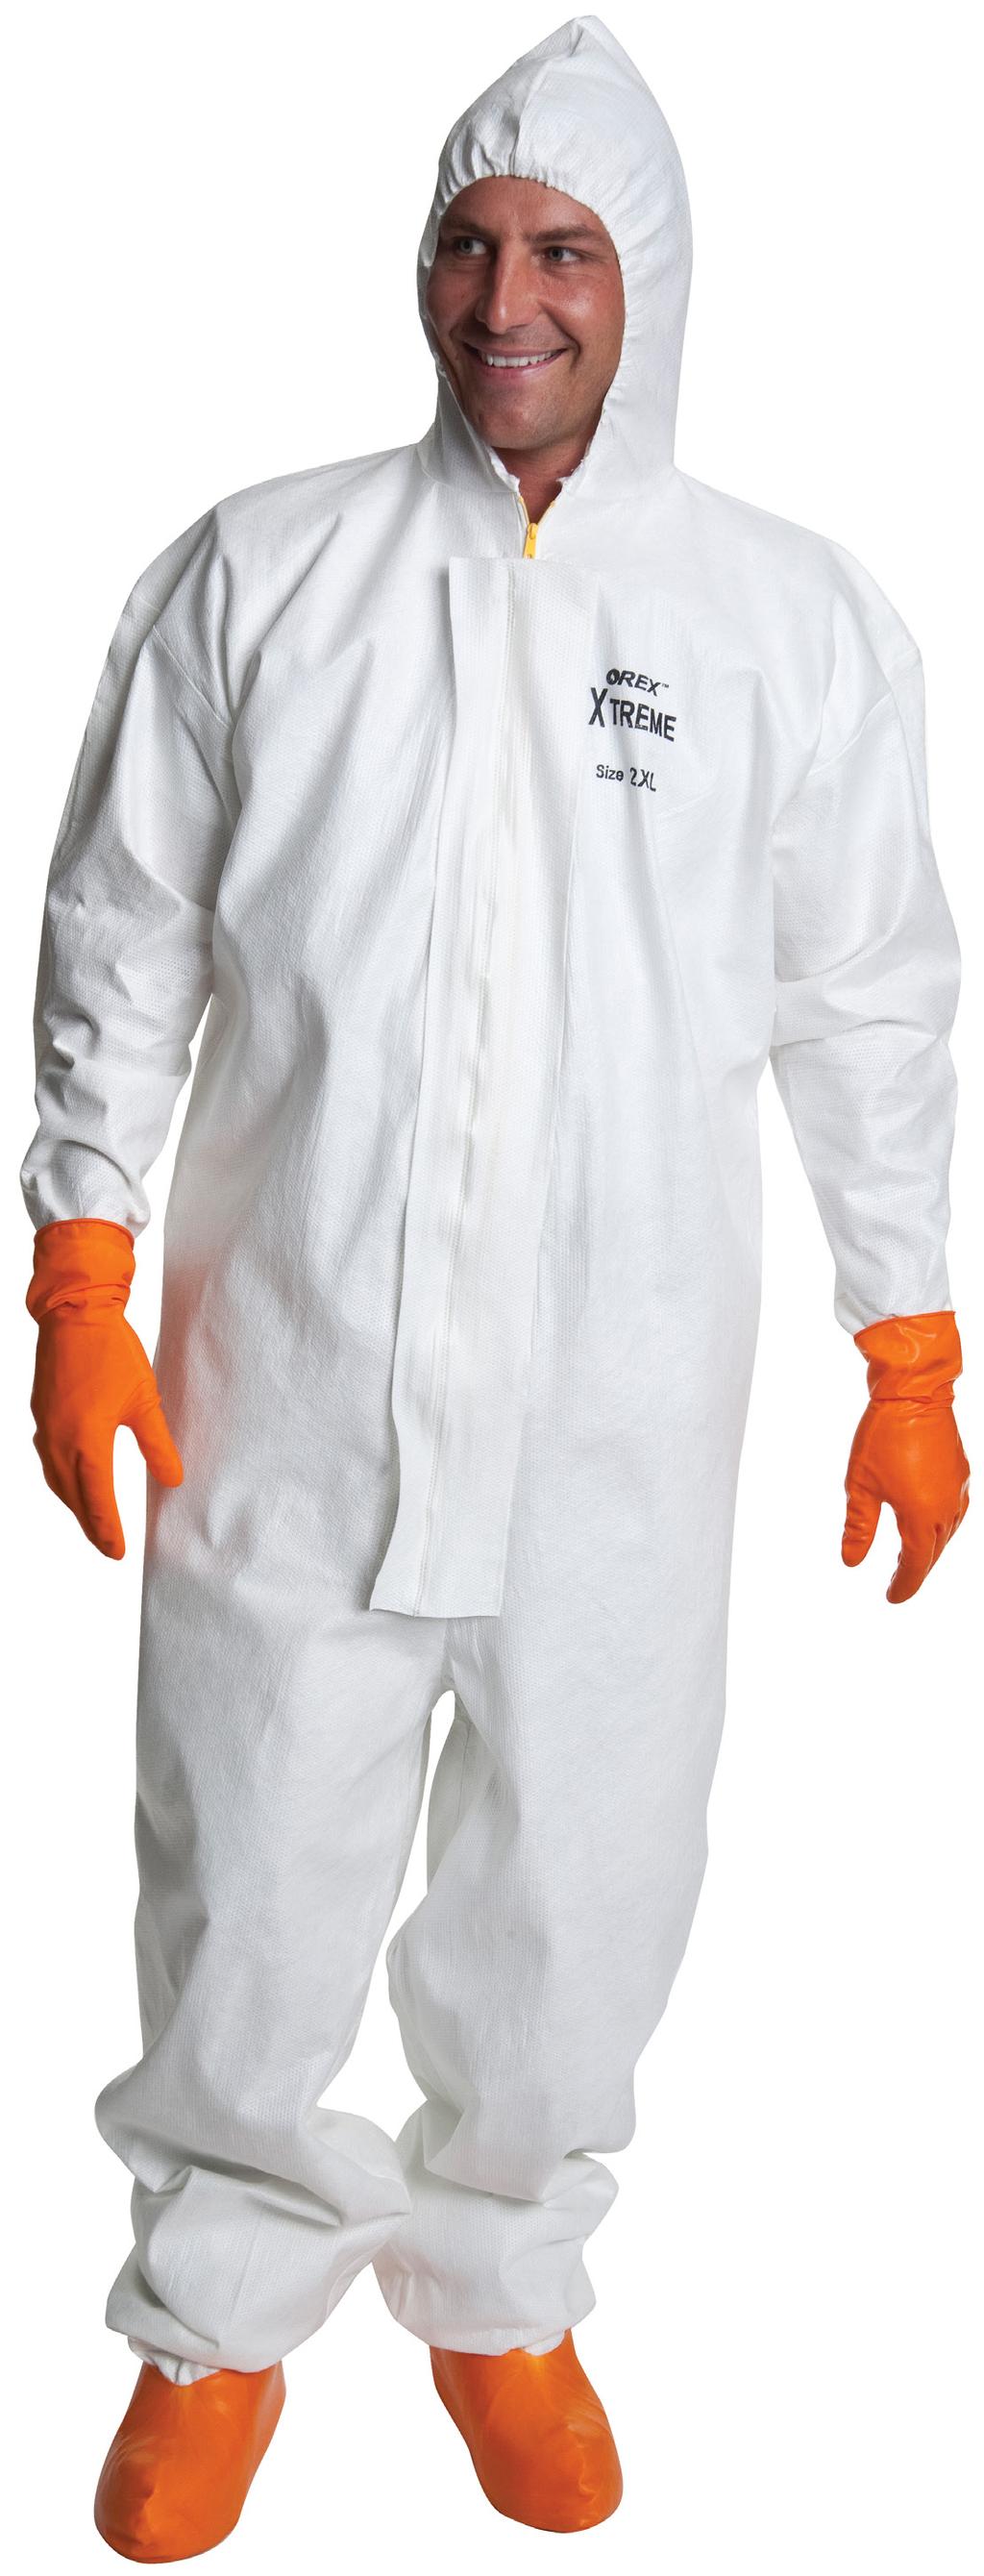 Coveralls OREX Xtreme Coverall When you need the ultimate in protection, the OREX Xtreme Coverall has you covered!